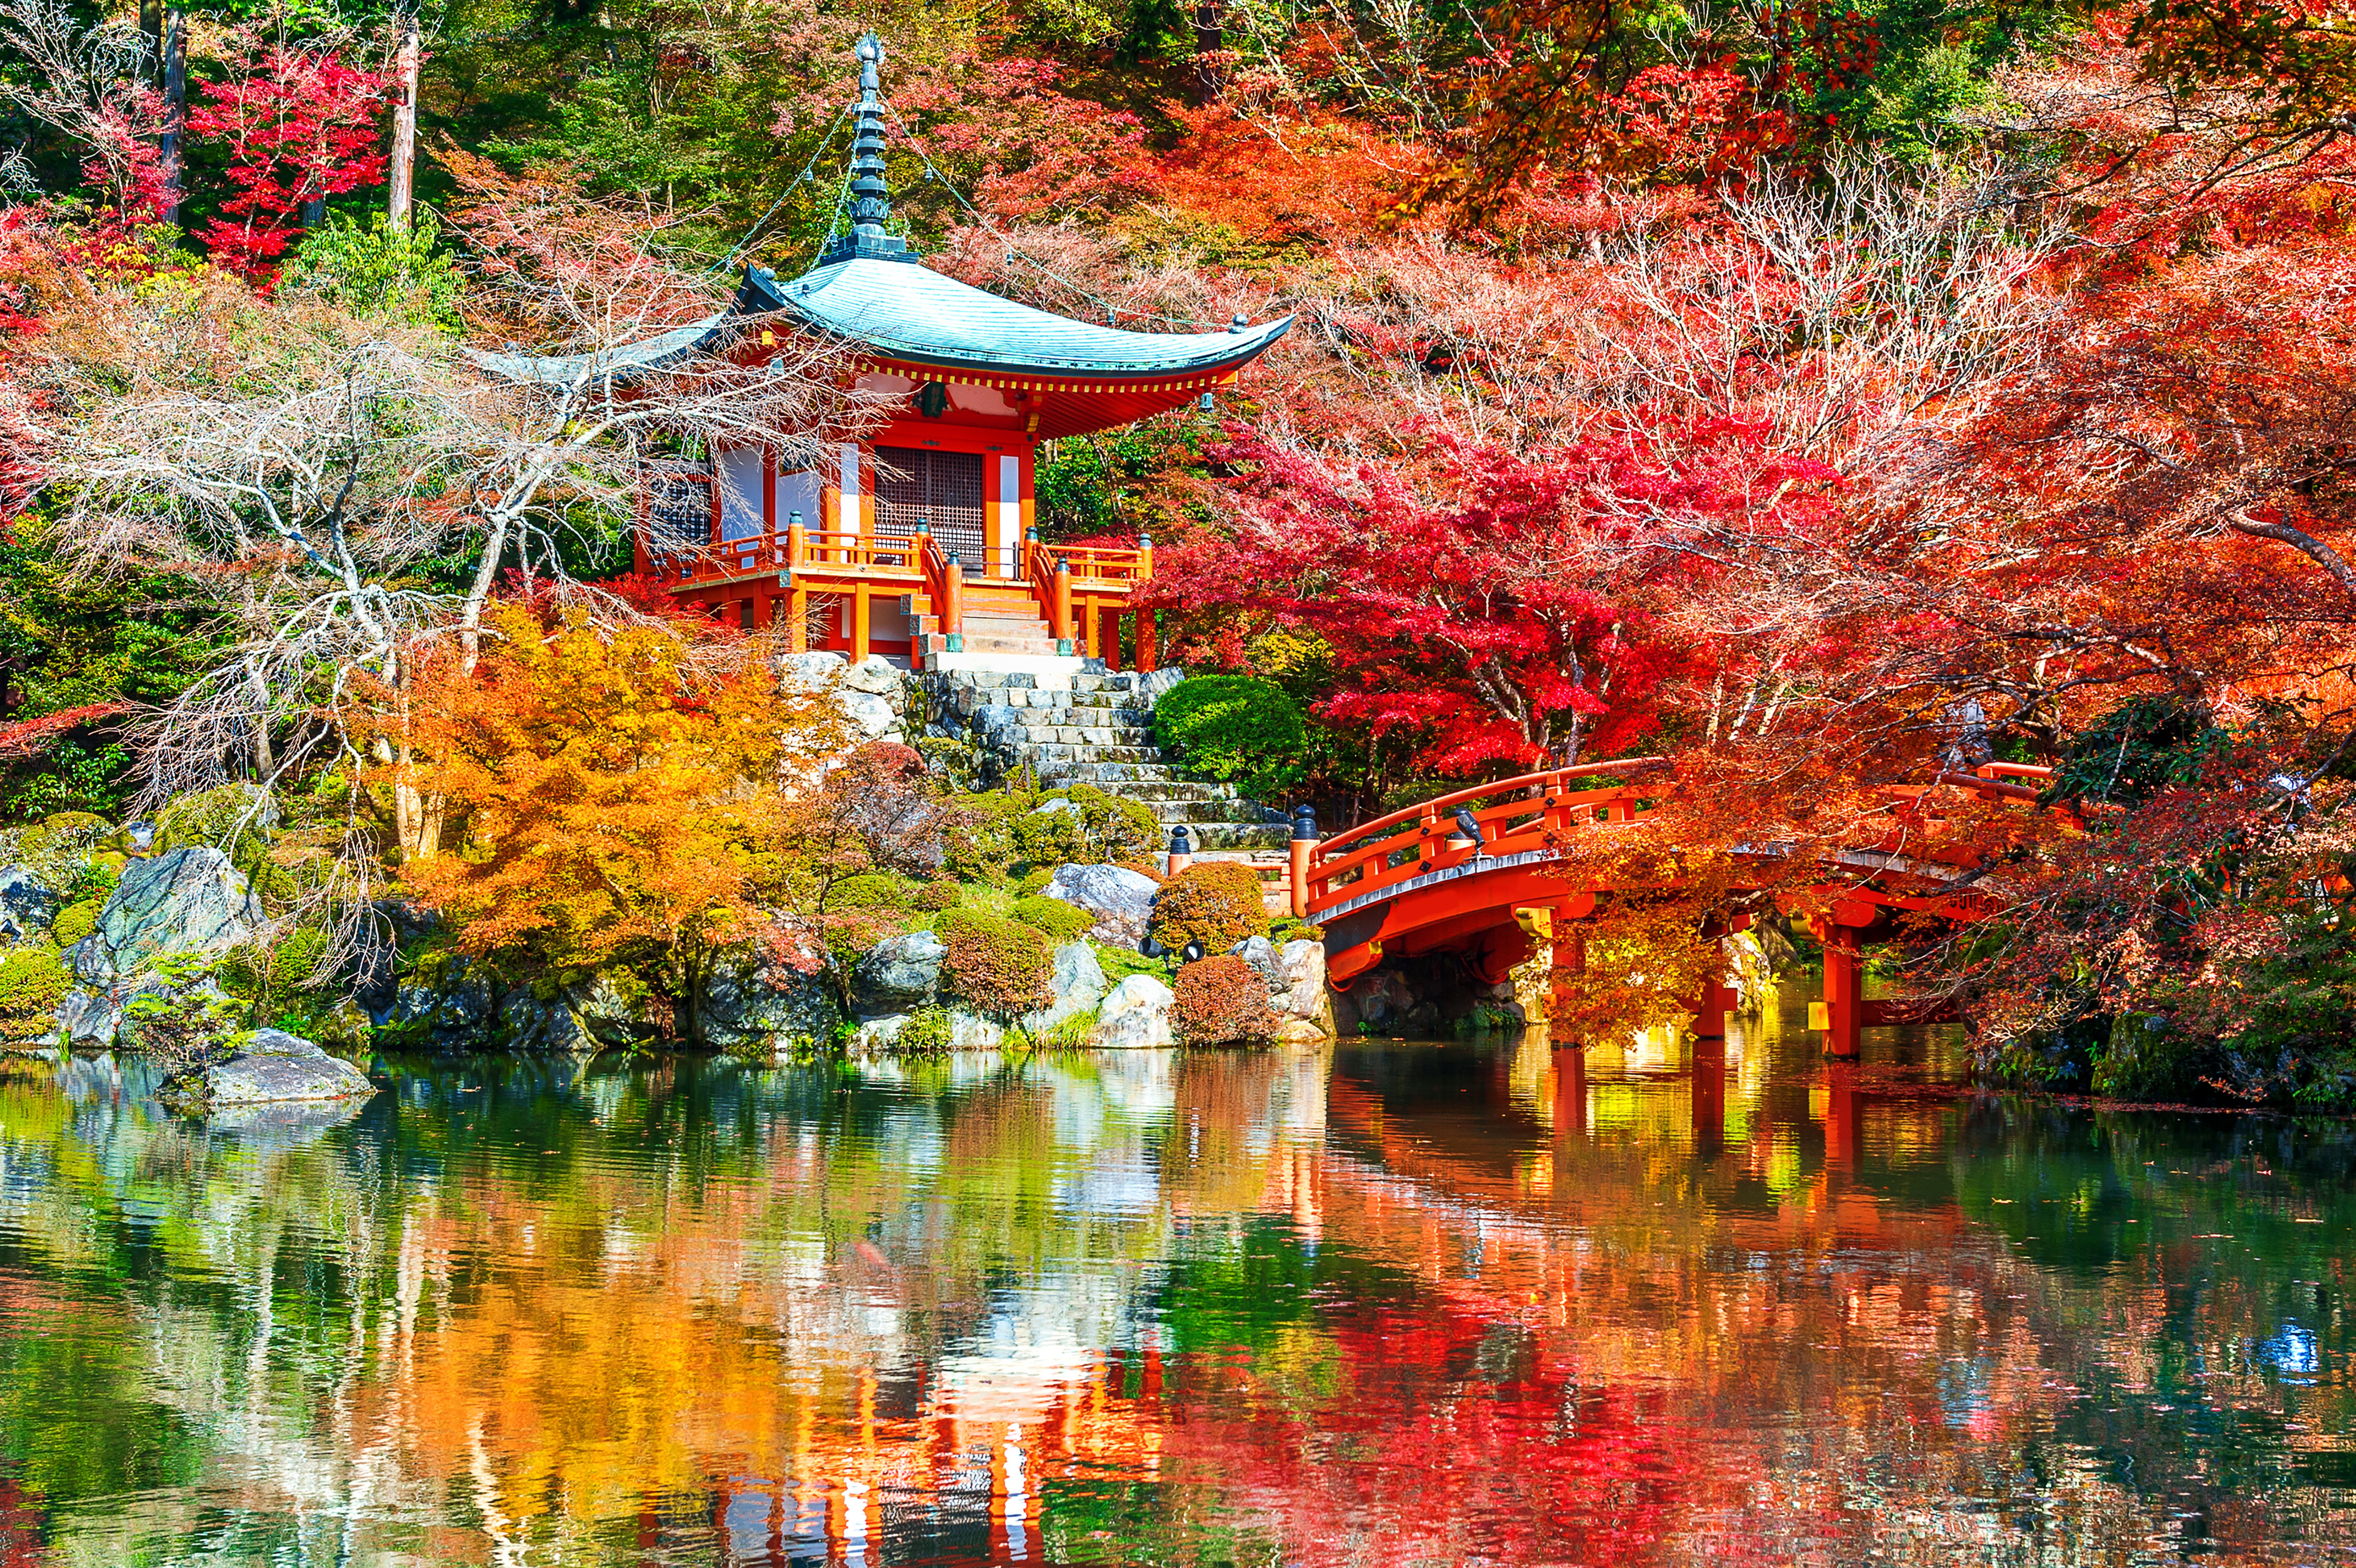 Scenic view of autumn foliage reflected in a serene lake with a traditional bridge, captured at Daigo-ji Park in Kyoto, Japan.